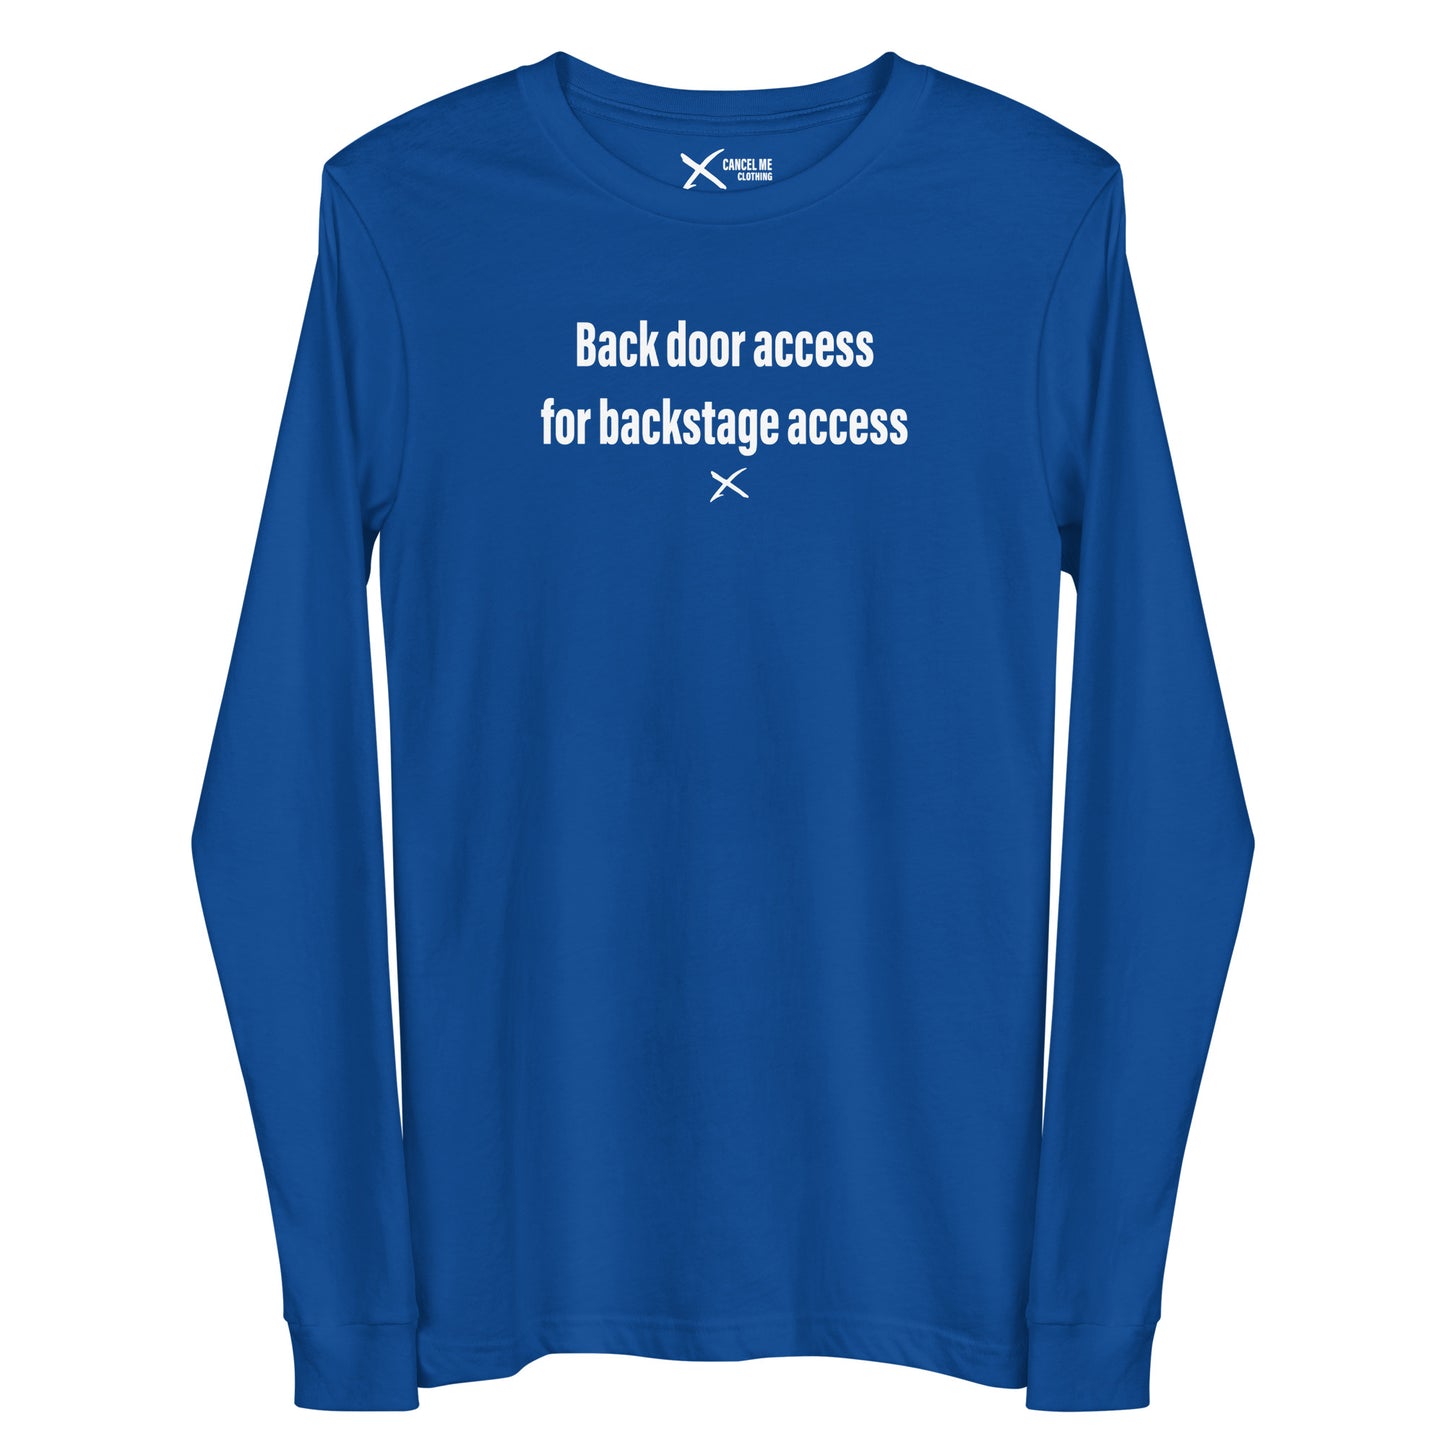 Back door access for backstage access - Longsleeve